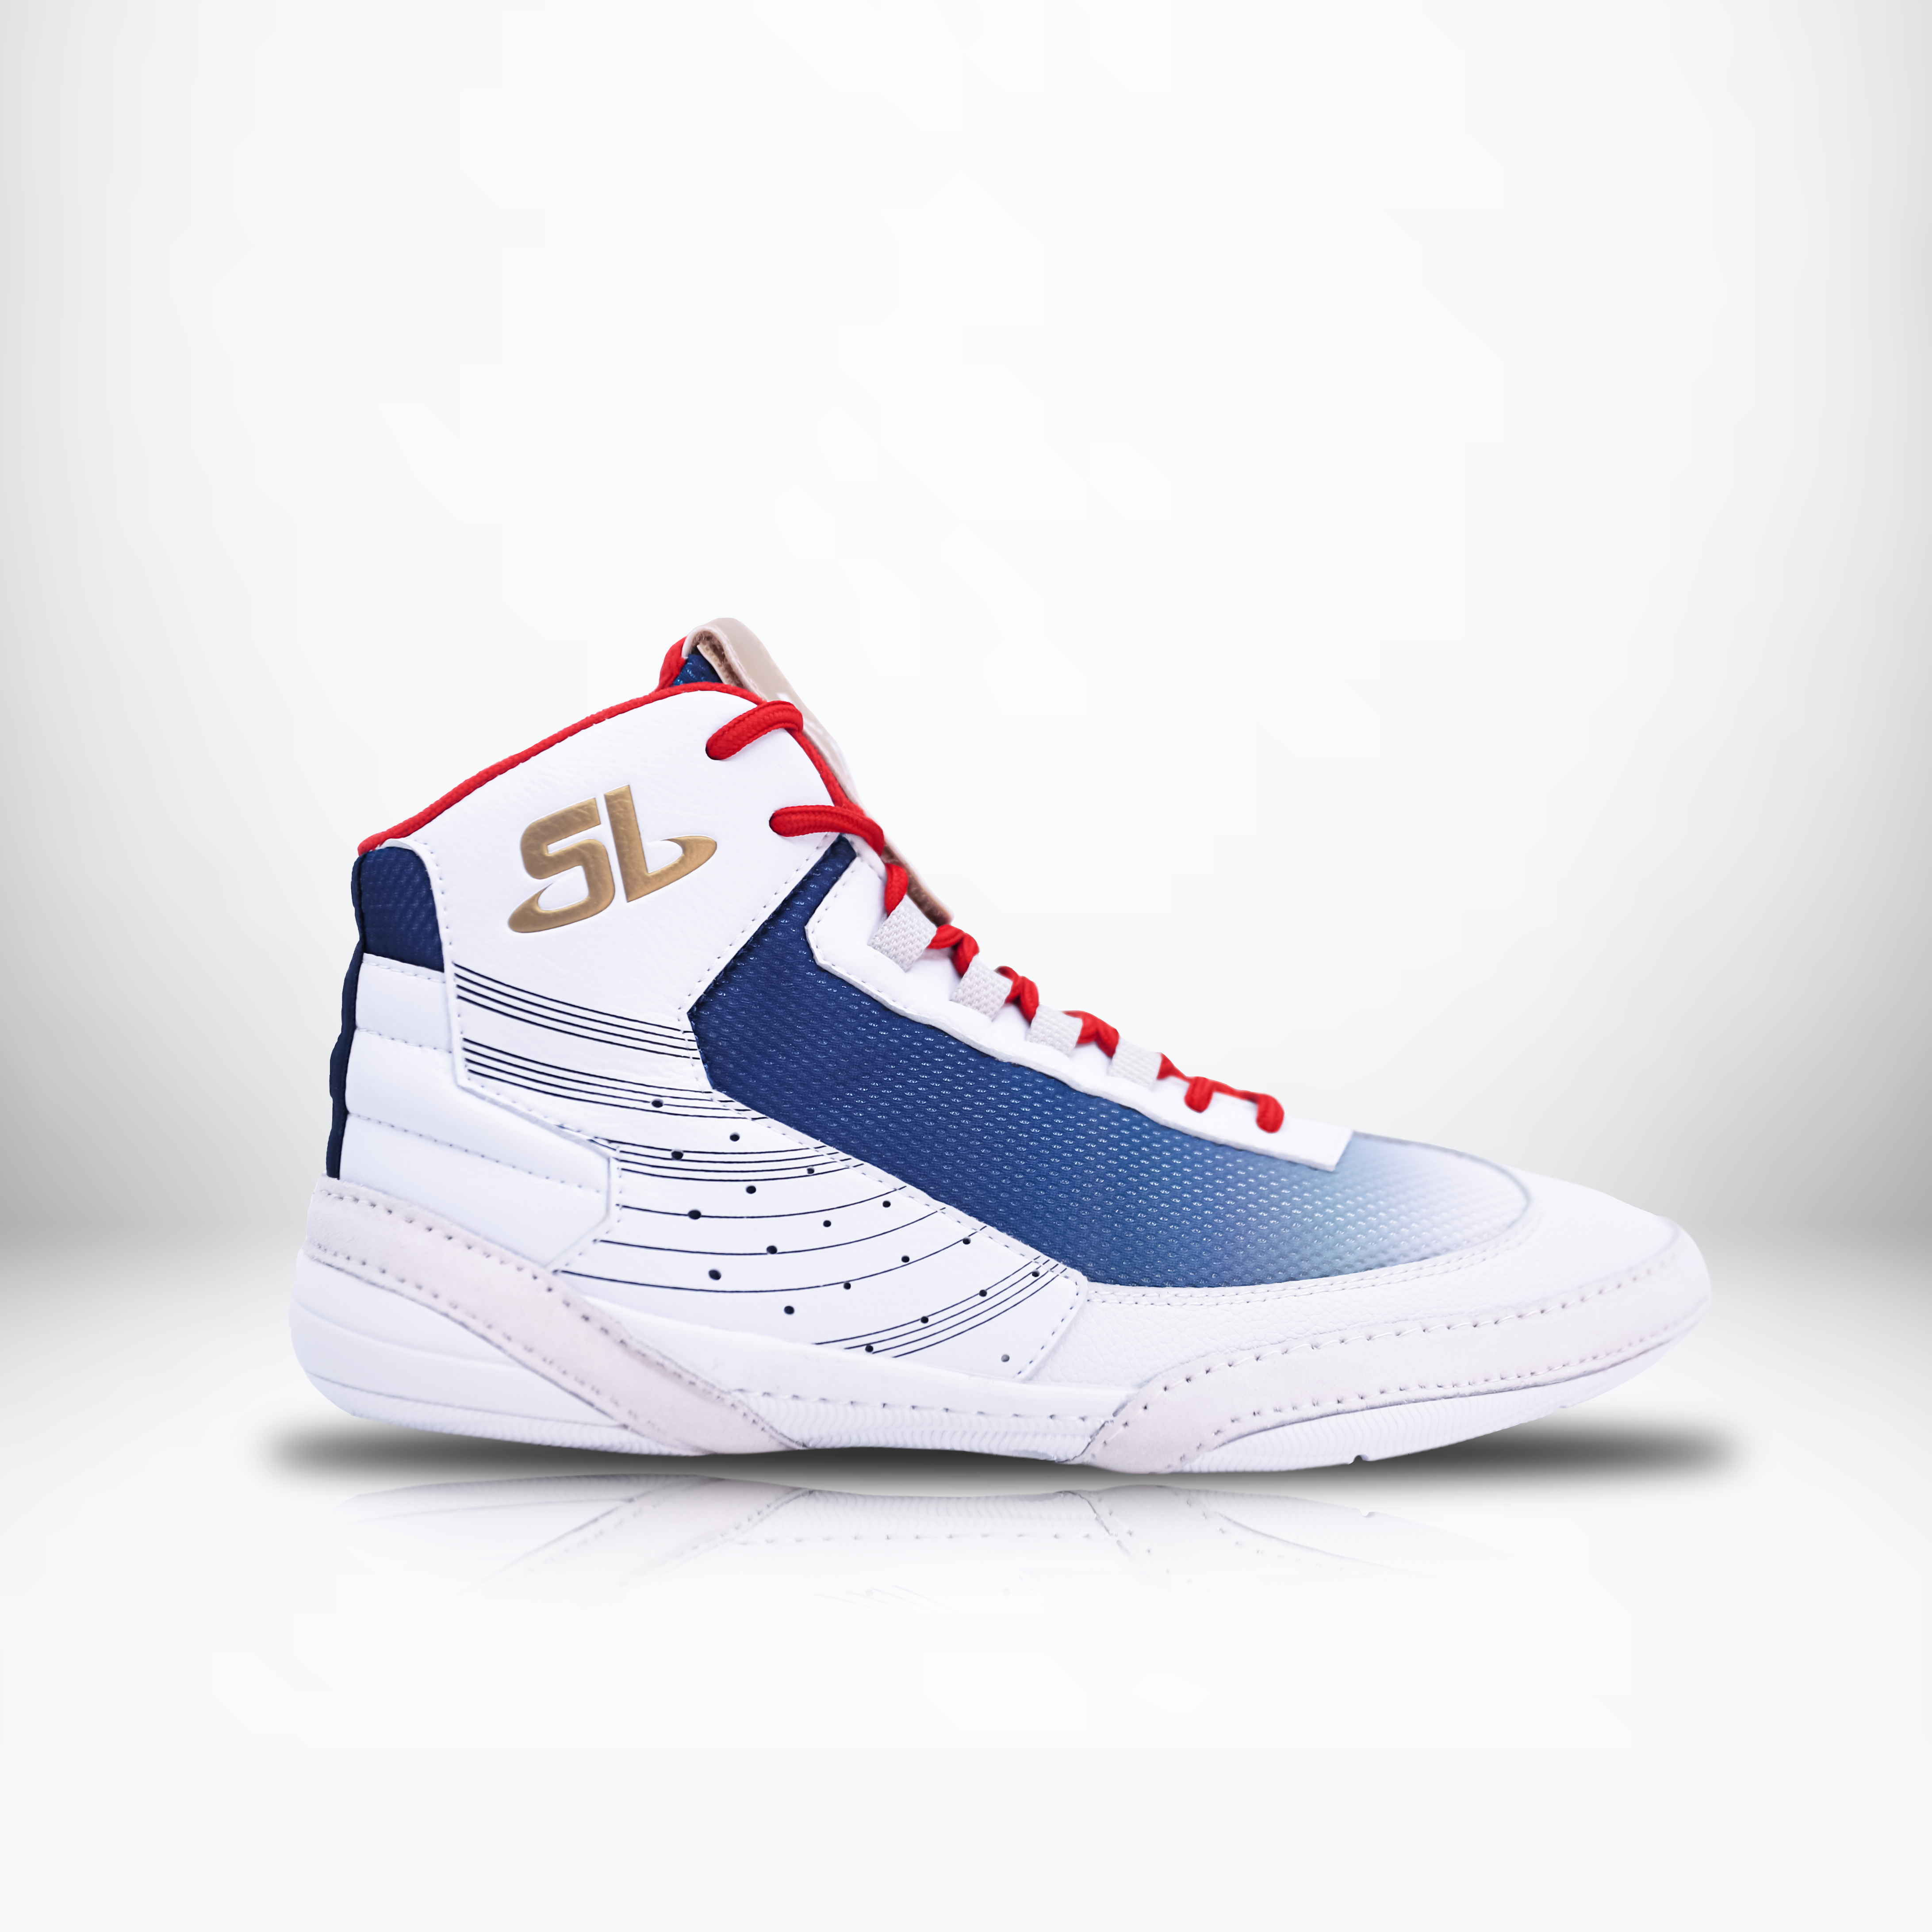 Ascend One - Limited Edition - David Taylor Signature Model -  White/Red/Blue